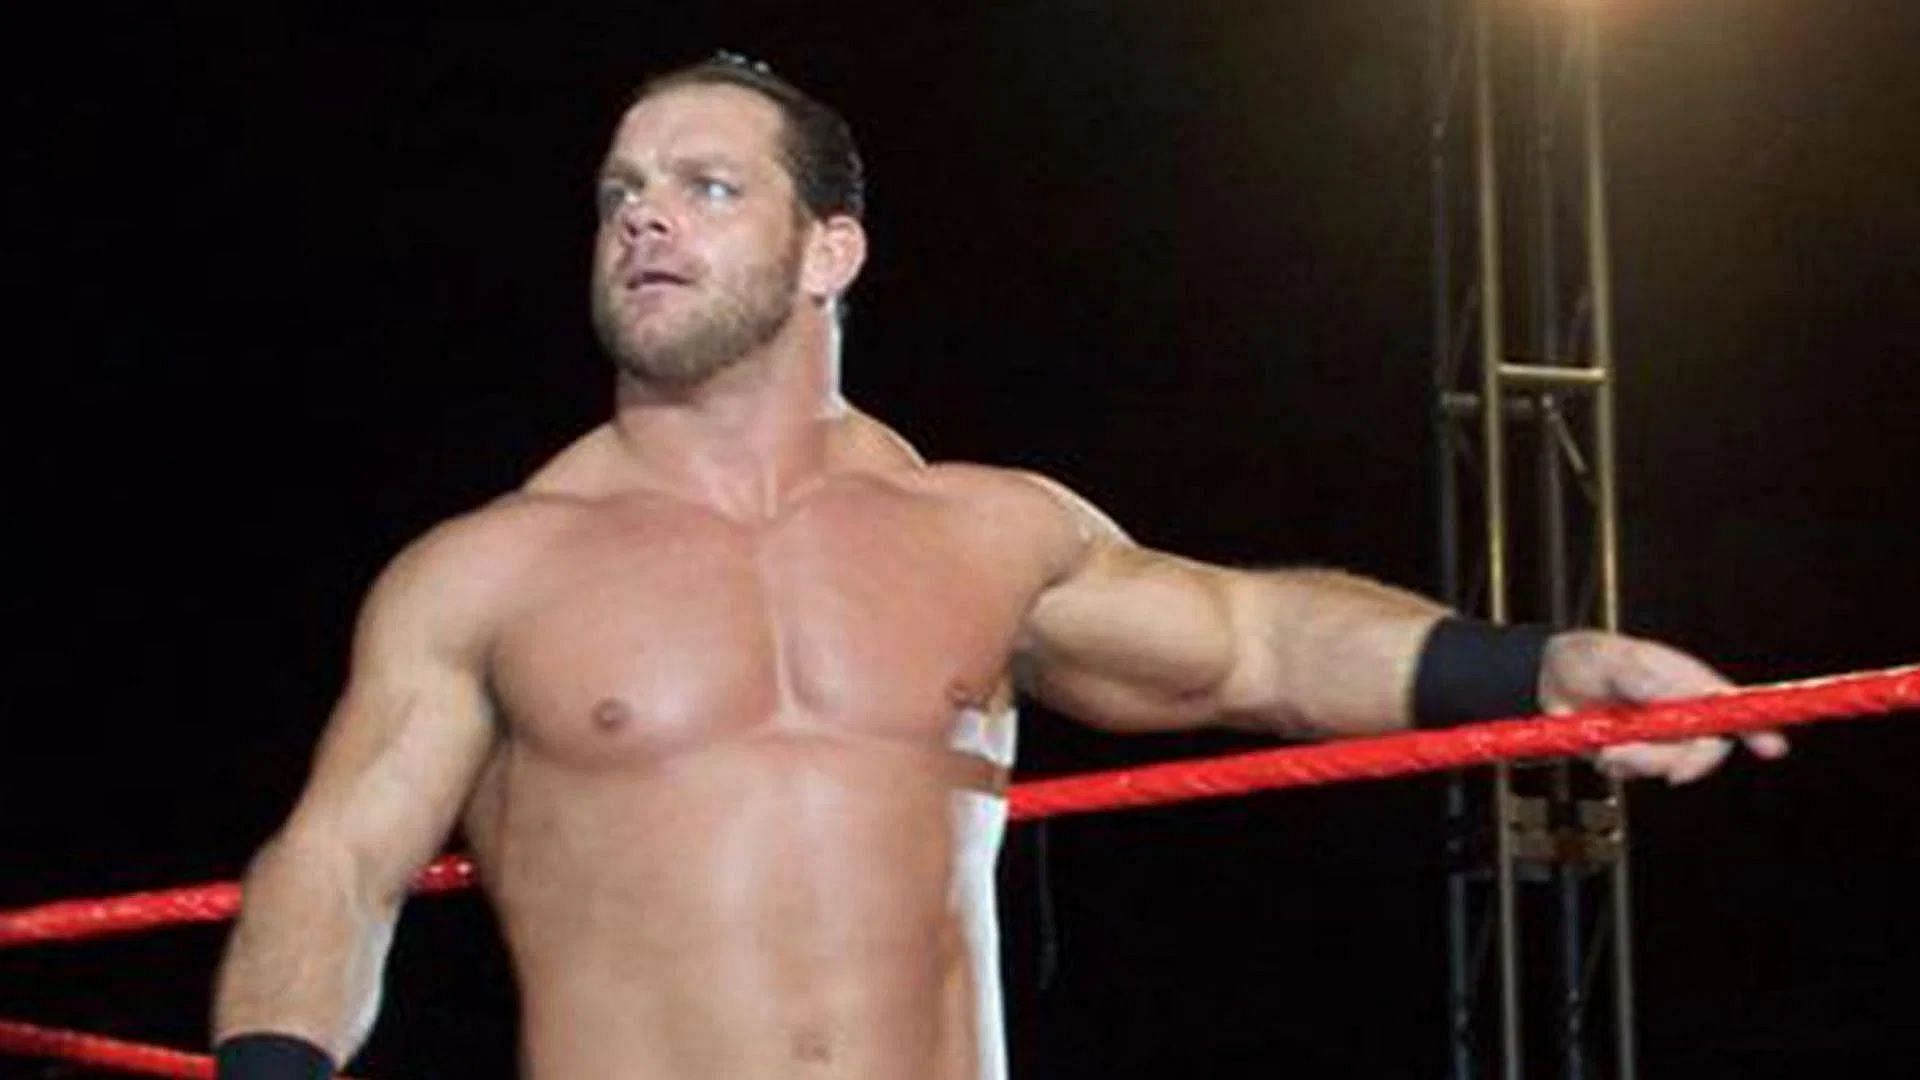 Chris Benoit tragedy continues to spark conversation today